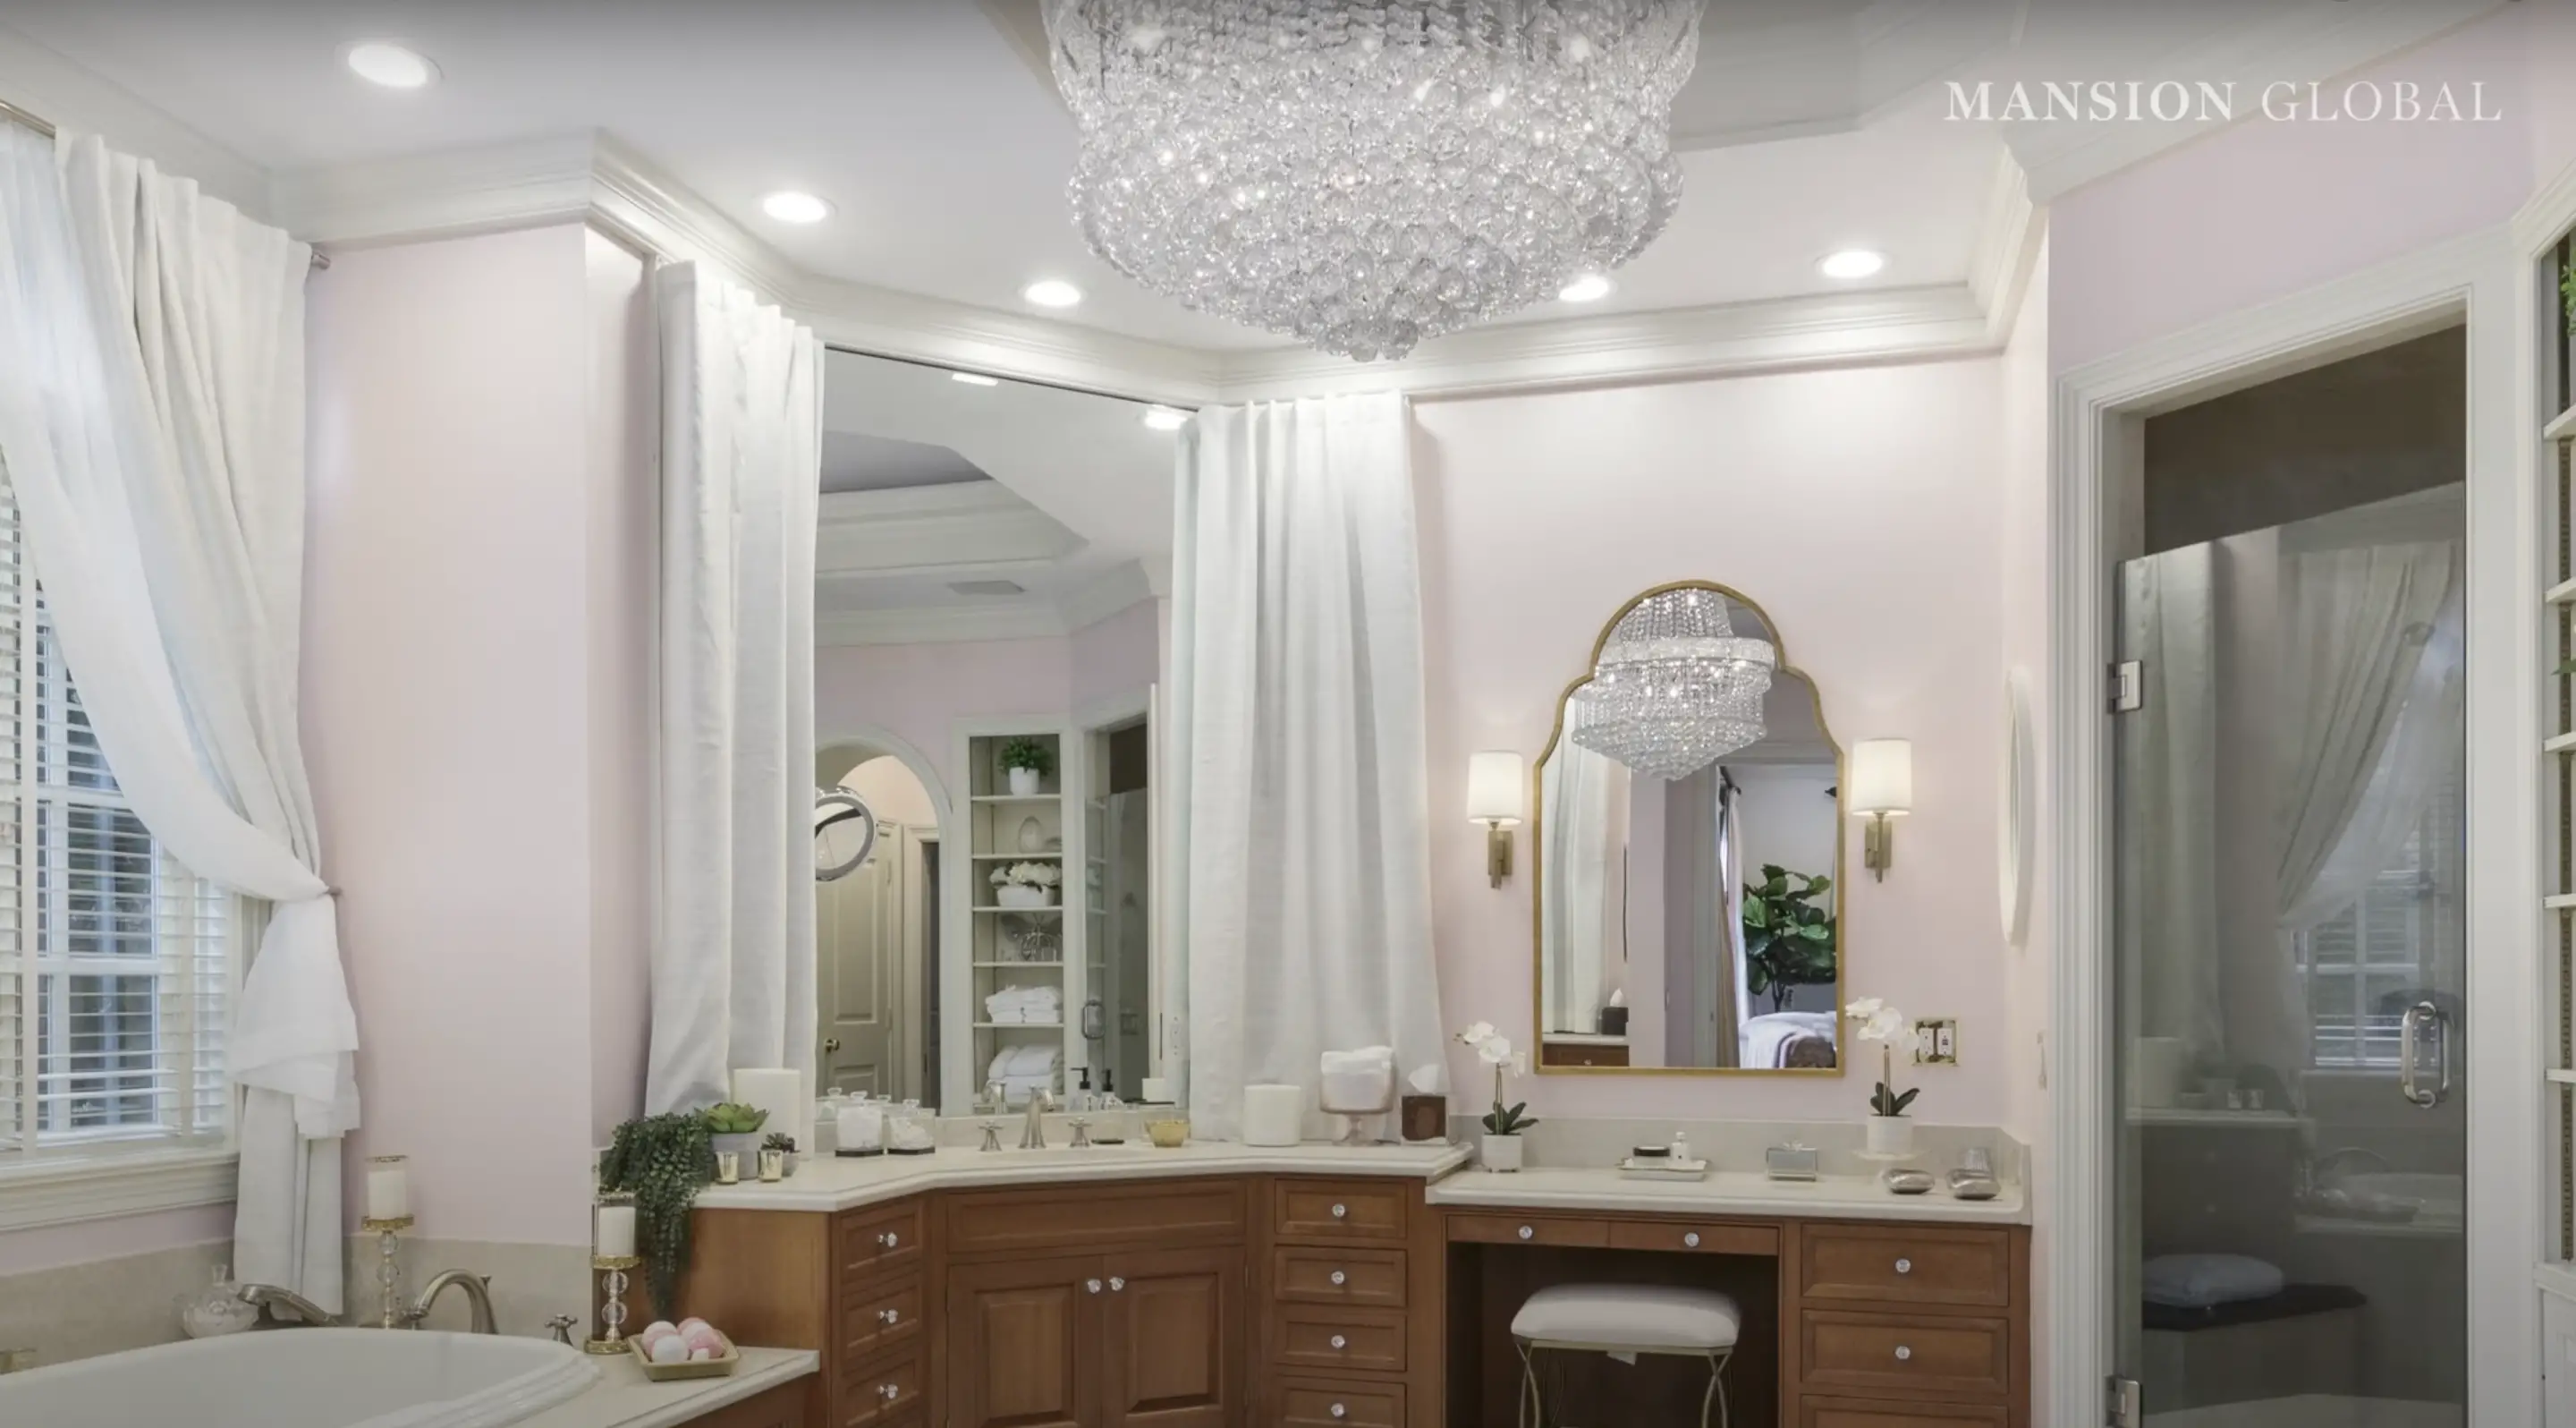 Mariah Carey's former mansion in Atlanta, Georgia, from a video dated March 16, 2023 | Source: Youtube.com/@mg-beckiestrum-lizlucking